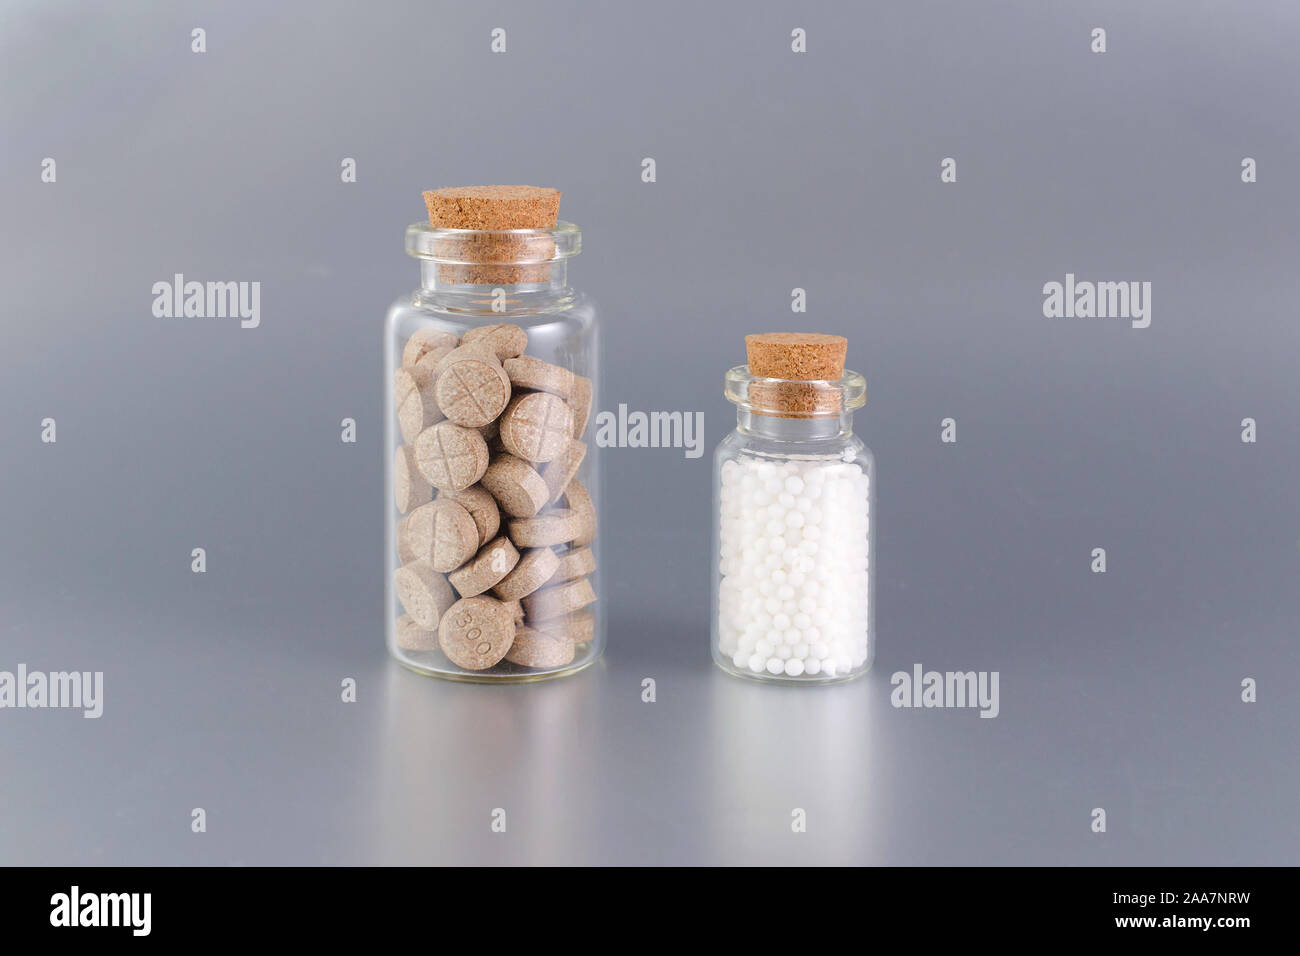 natural medicine bottles with herbal pills and globules on gray background Stock Photo